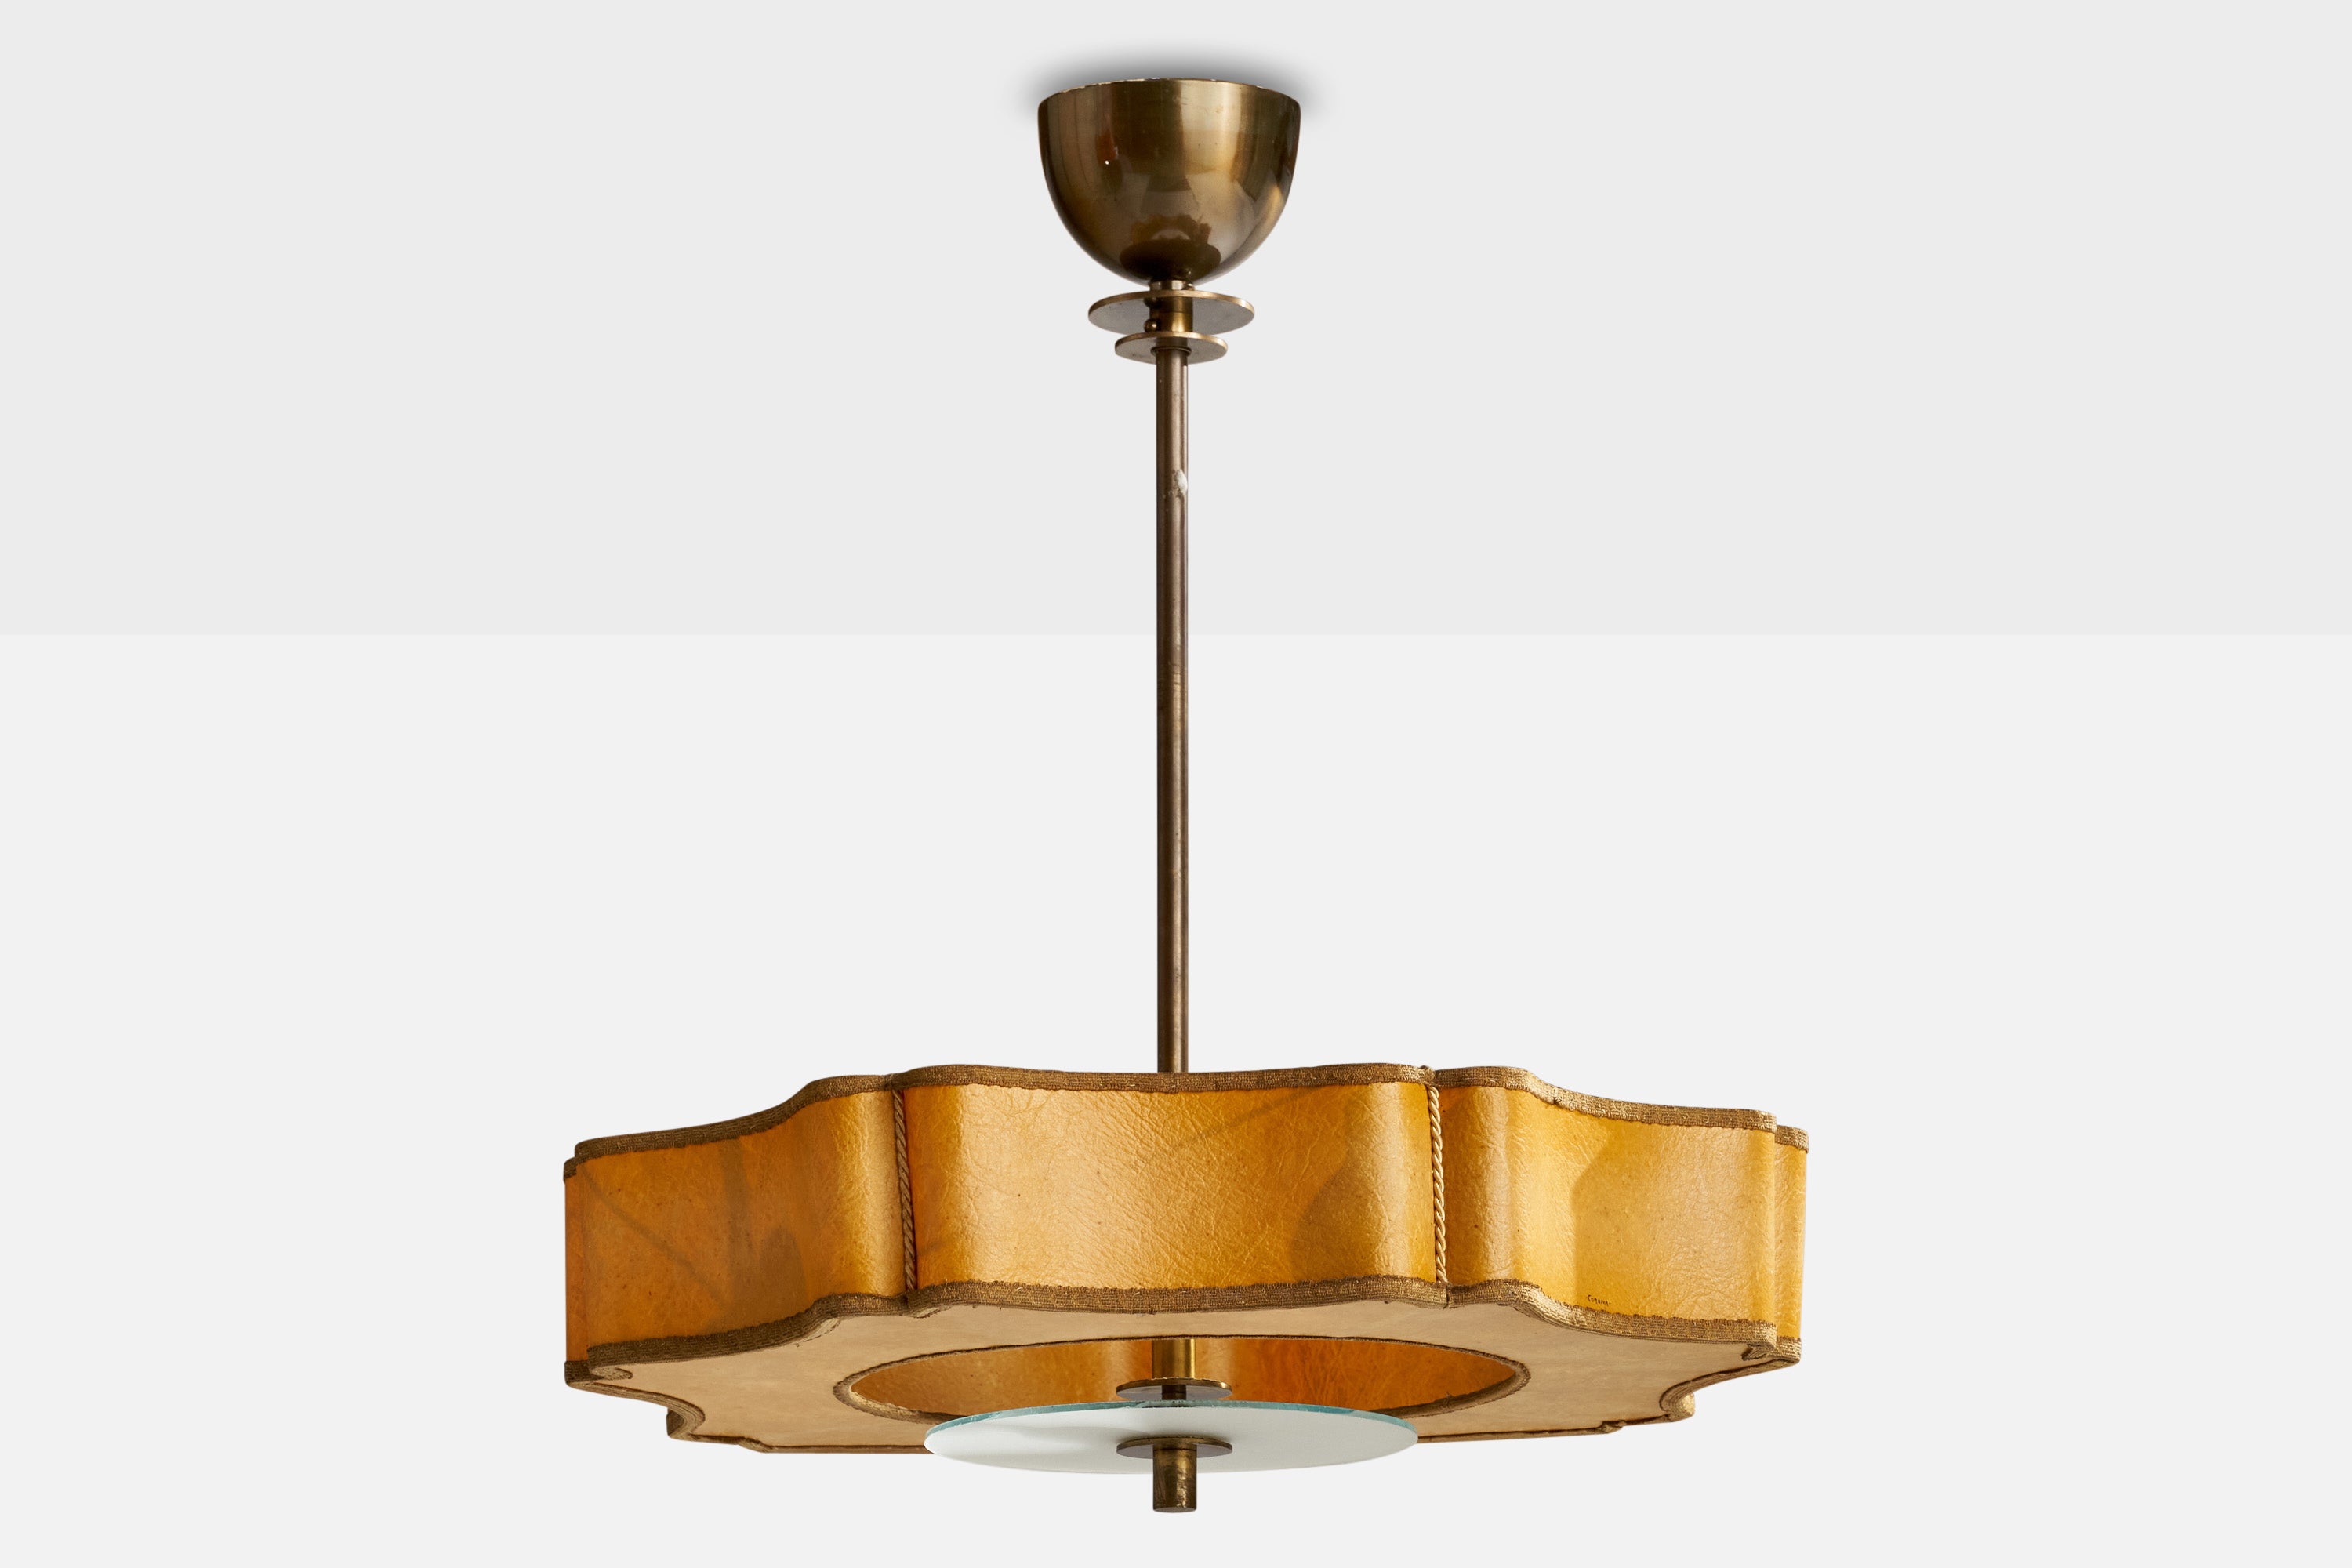 A brass, glass and yellow beige parchment paper pendant light designed and produced by Corona Belysning, Sweden, 1930s.

Dimensions of canopy (inches): 3” H x 4.25” Diameter
Socket takes standard E-26 bulbs. 4 sockets.There is no maximum wattage